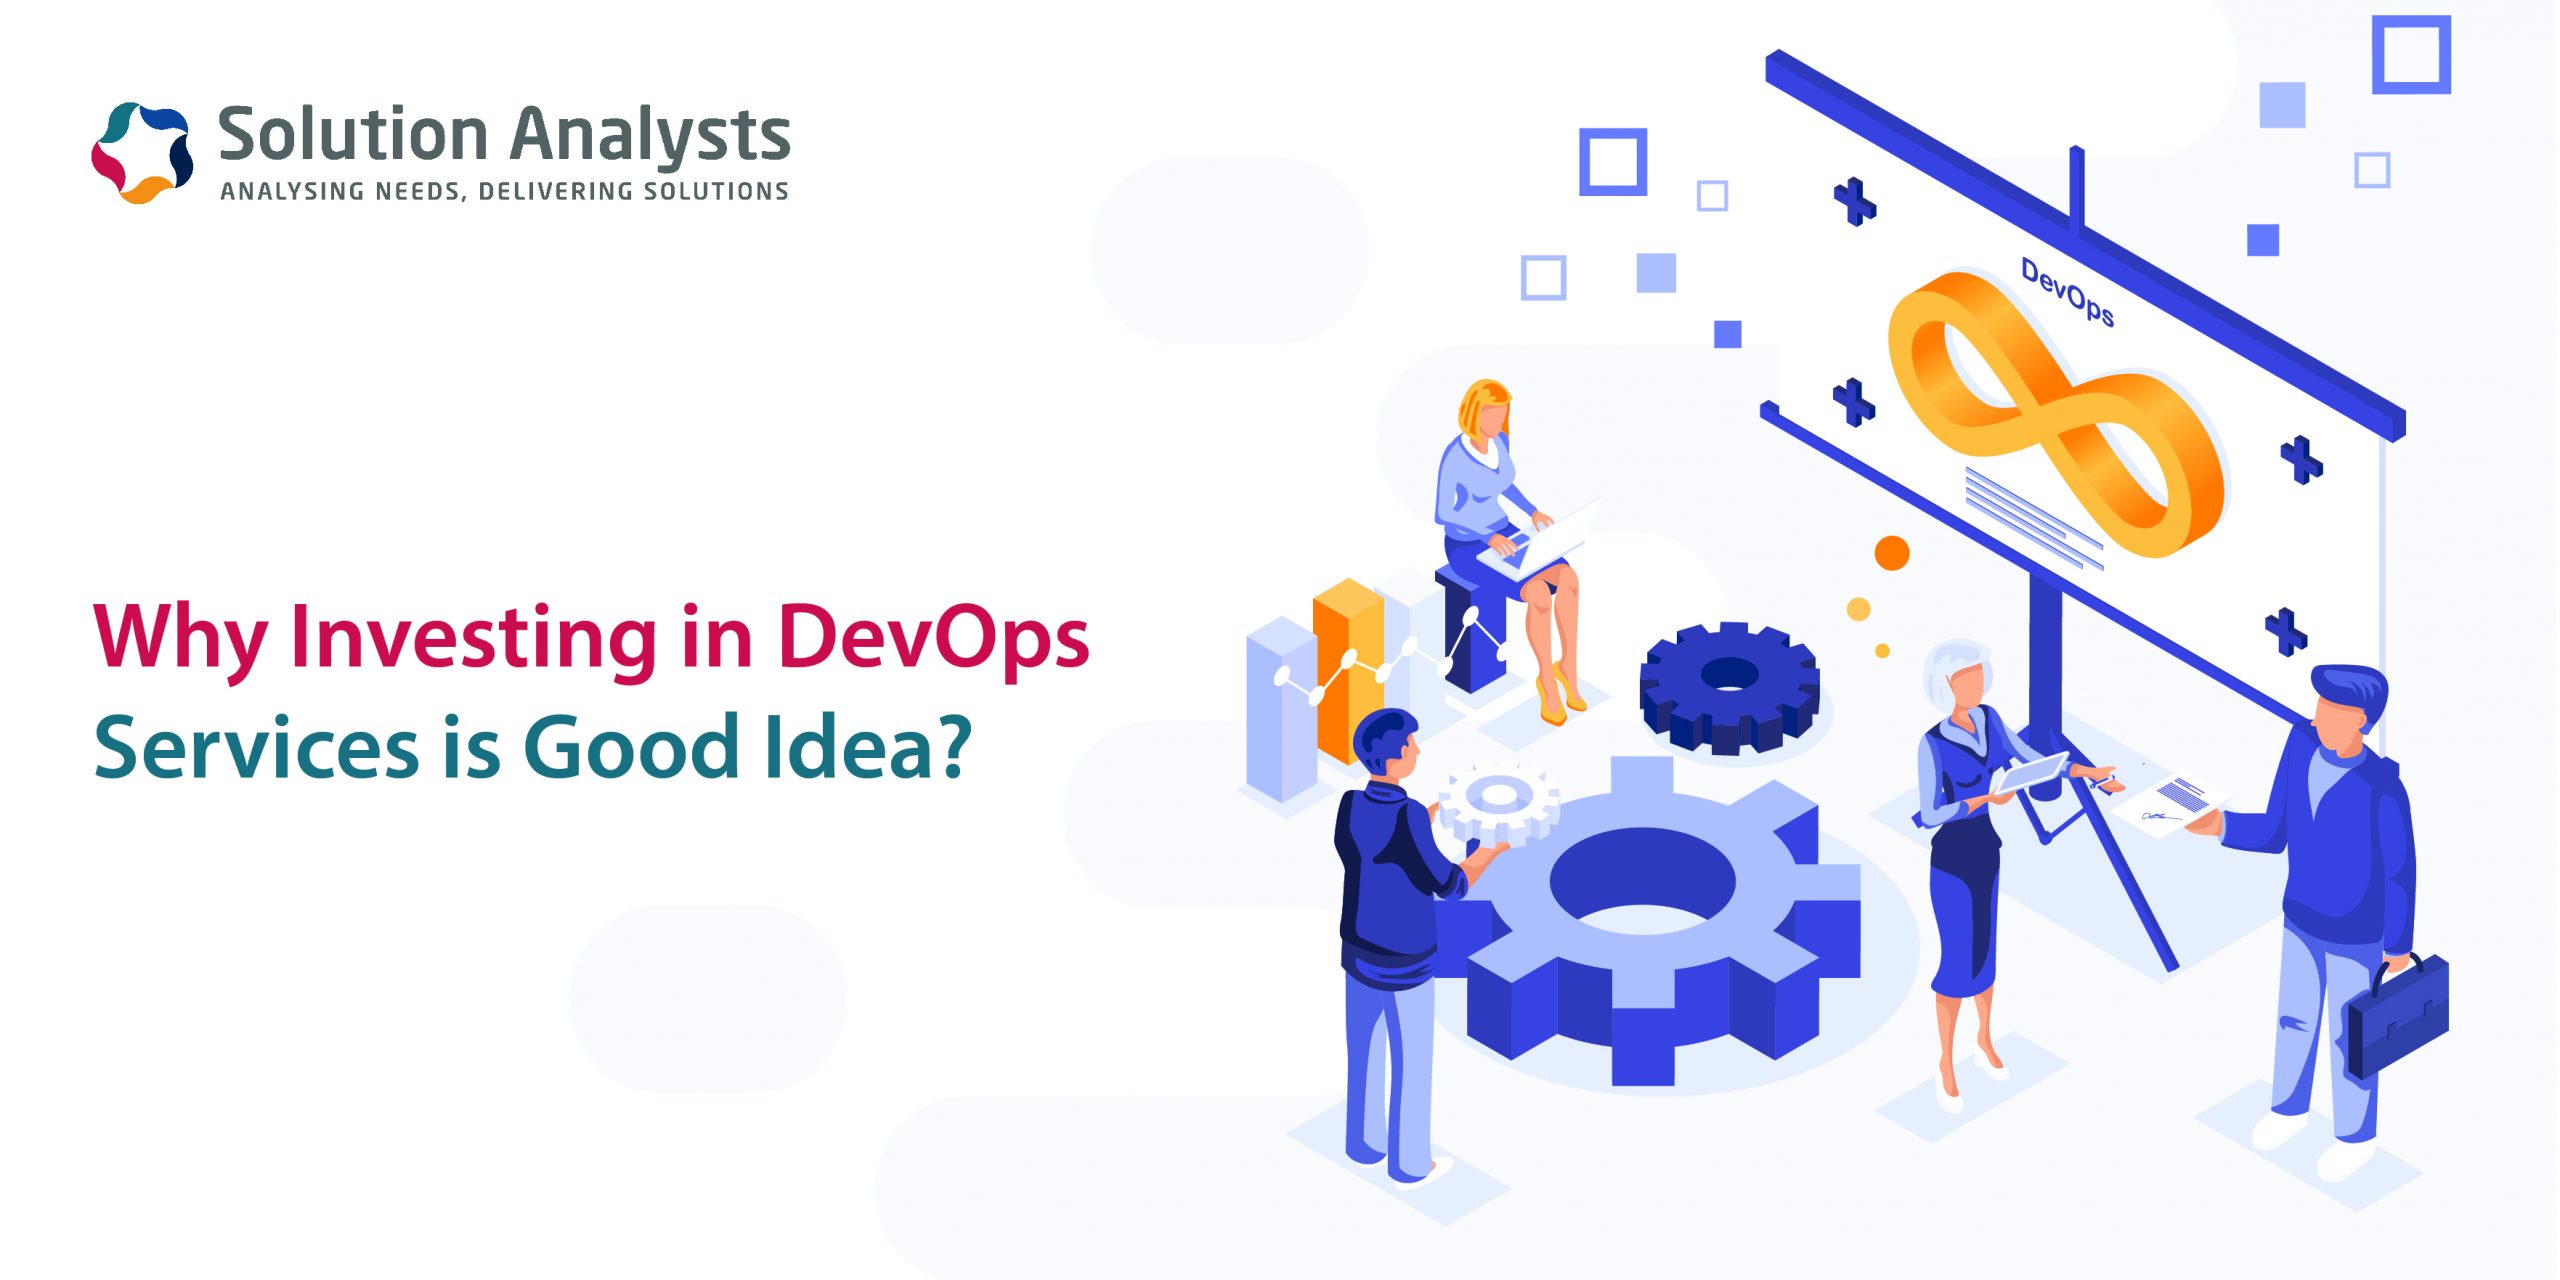 Why Does Your Enterprise Need DevOps Services?